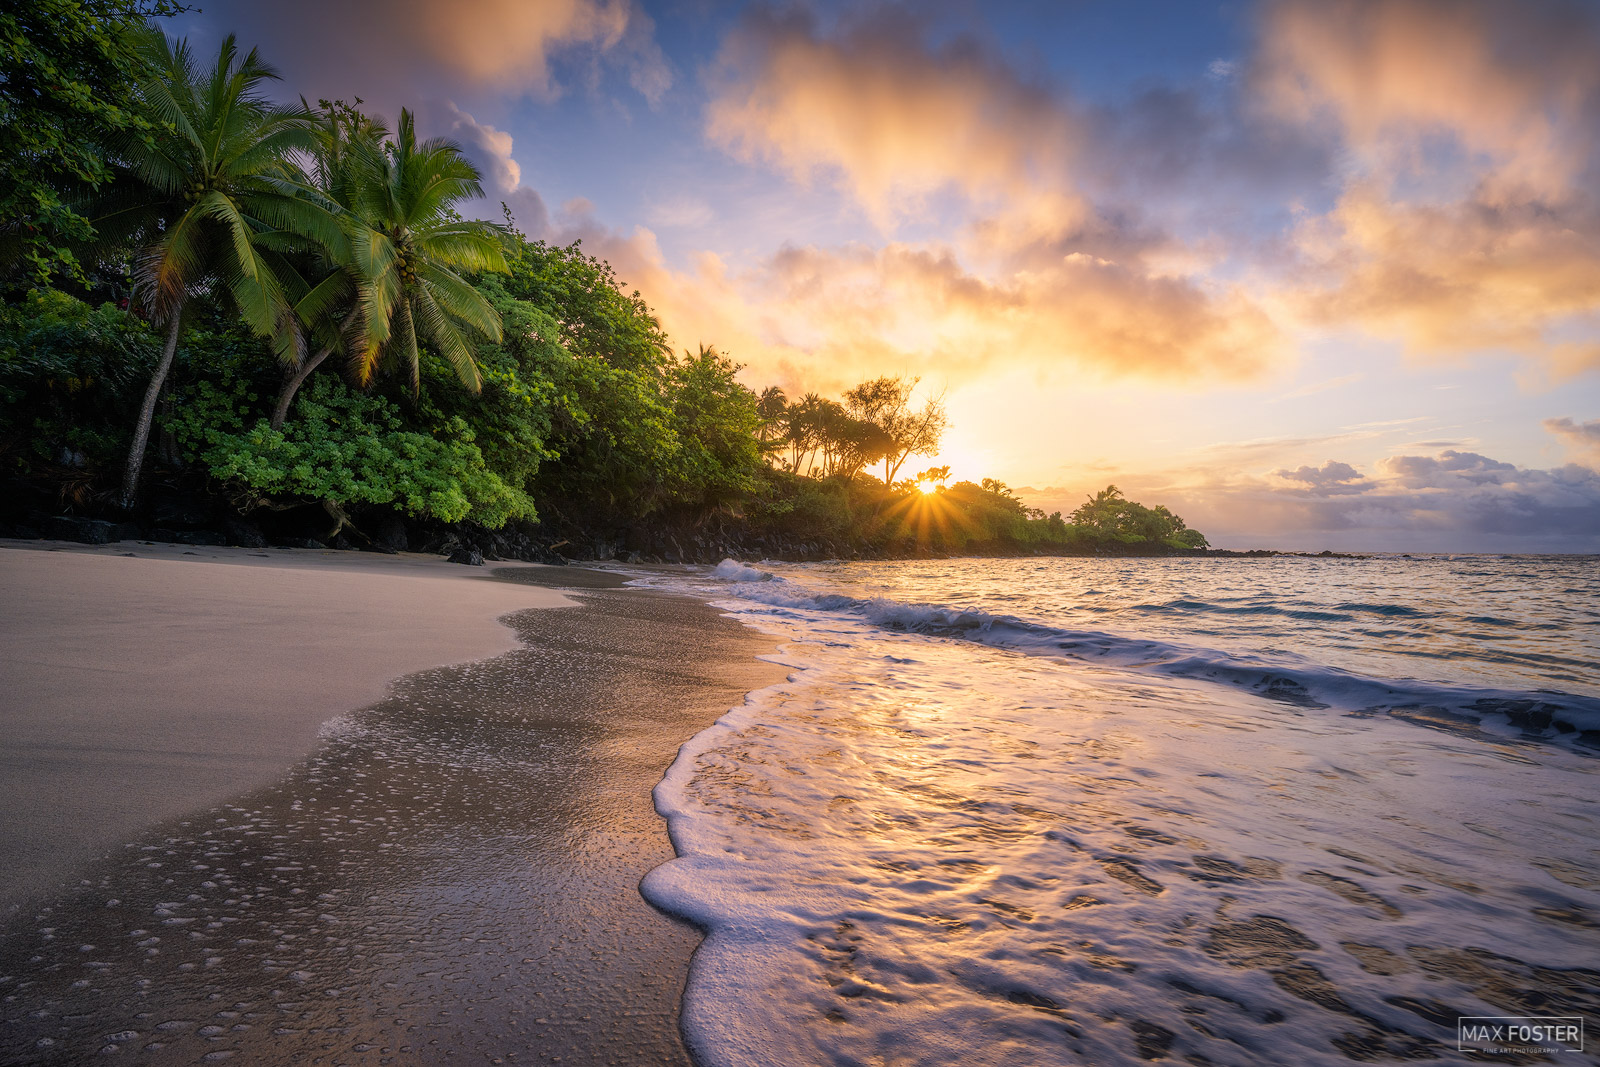 Refresh your space with Heaven On Earth, Max Foster's limited edition photography print of Hamoa Beach, Maui from his Hawaii...